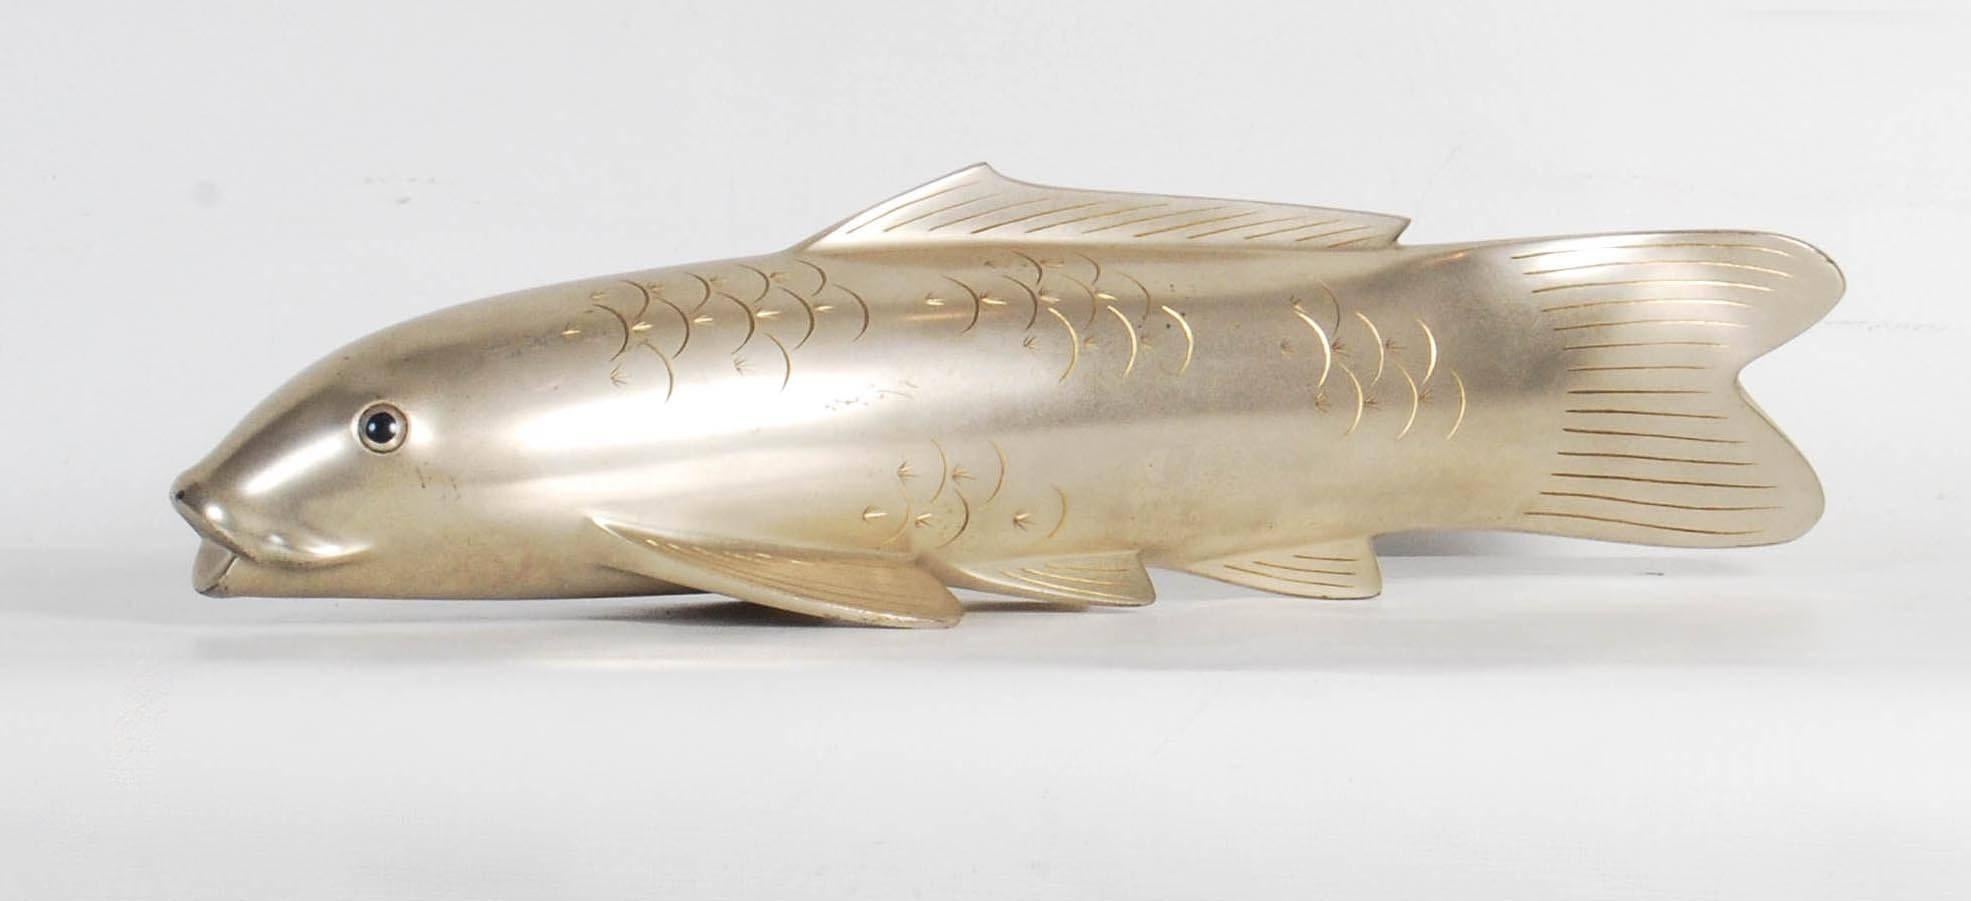 Japanese silvered bronze model of a carp by the known bronze artist Hiroharu Hiramatsu (1896-1971) with hand chased details in its fins and scales, inset and enameled eyes and the signature 'Hiroharu' inscribed on its underside.

Complete with its